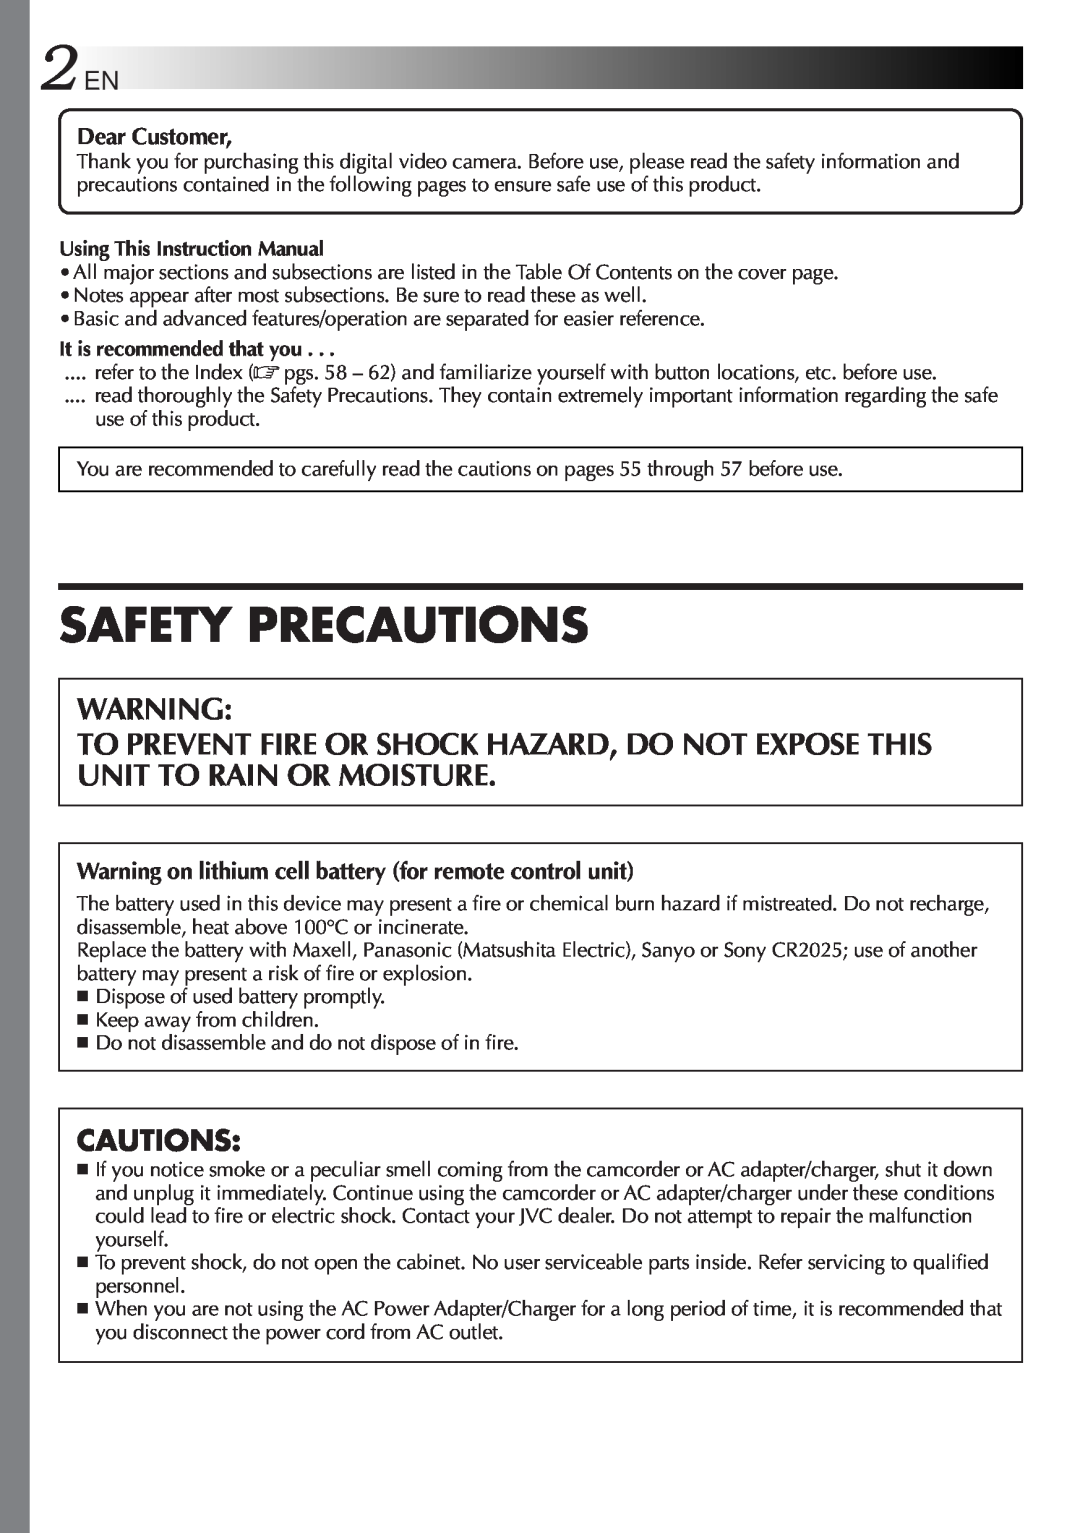 JVC GR-DVL48 Cautions, Dear Customer, Warning on lithium cell battery for remote control unit, Safety Precautions 